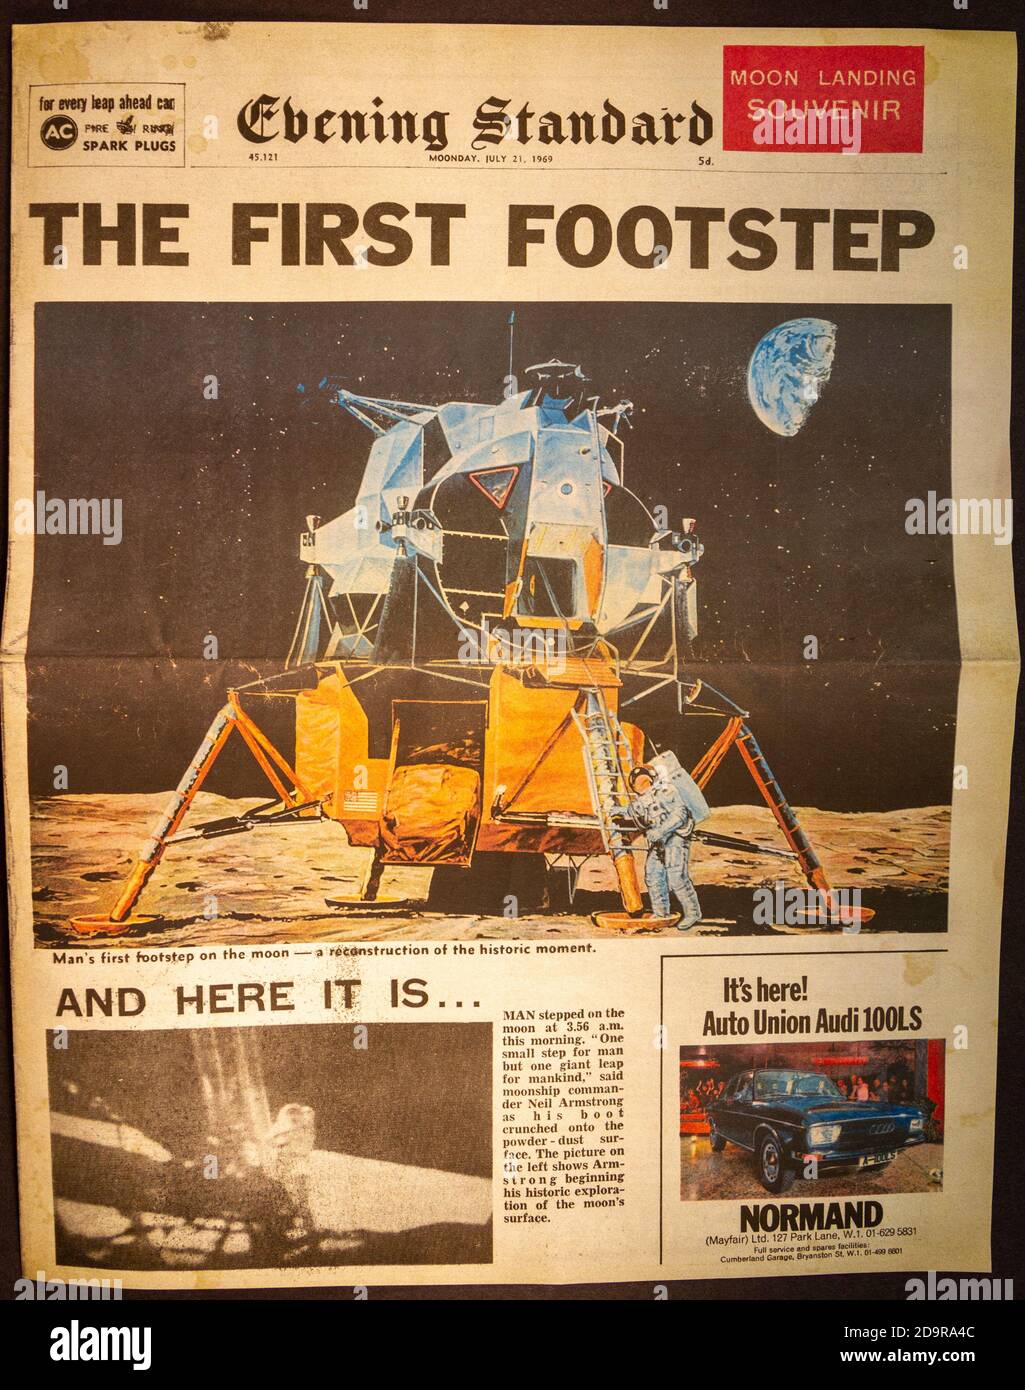 Front page showing the First Footstep of Neil Armstrong, Apollo 11 Moon landings in an Evening Standard souvenir newspaper (replica), 21st July 1969. Stock Photo